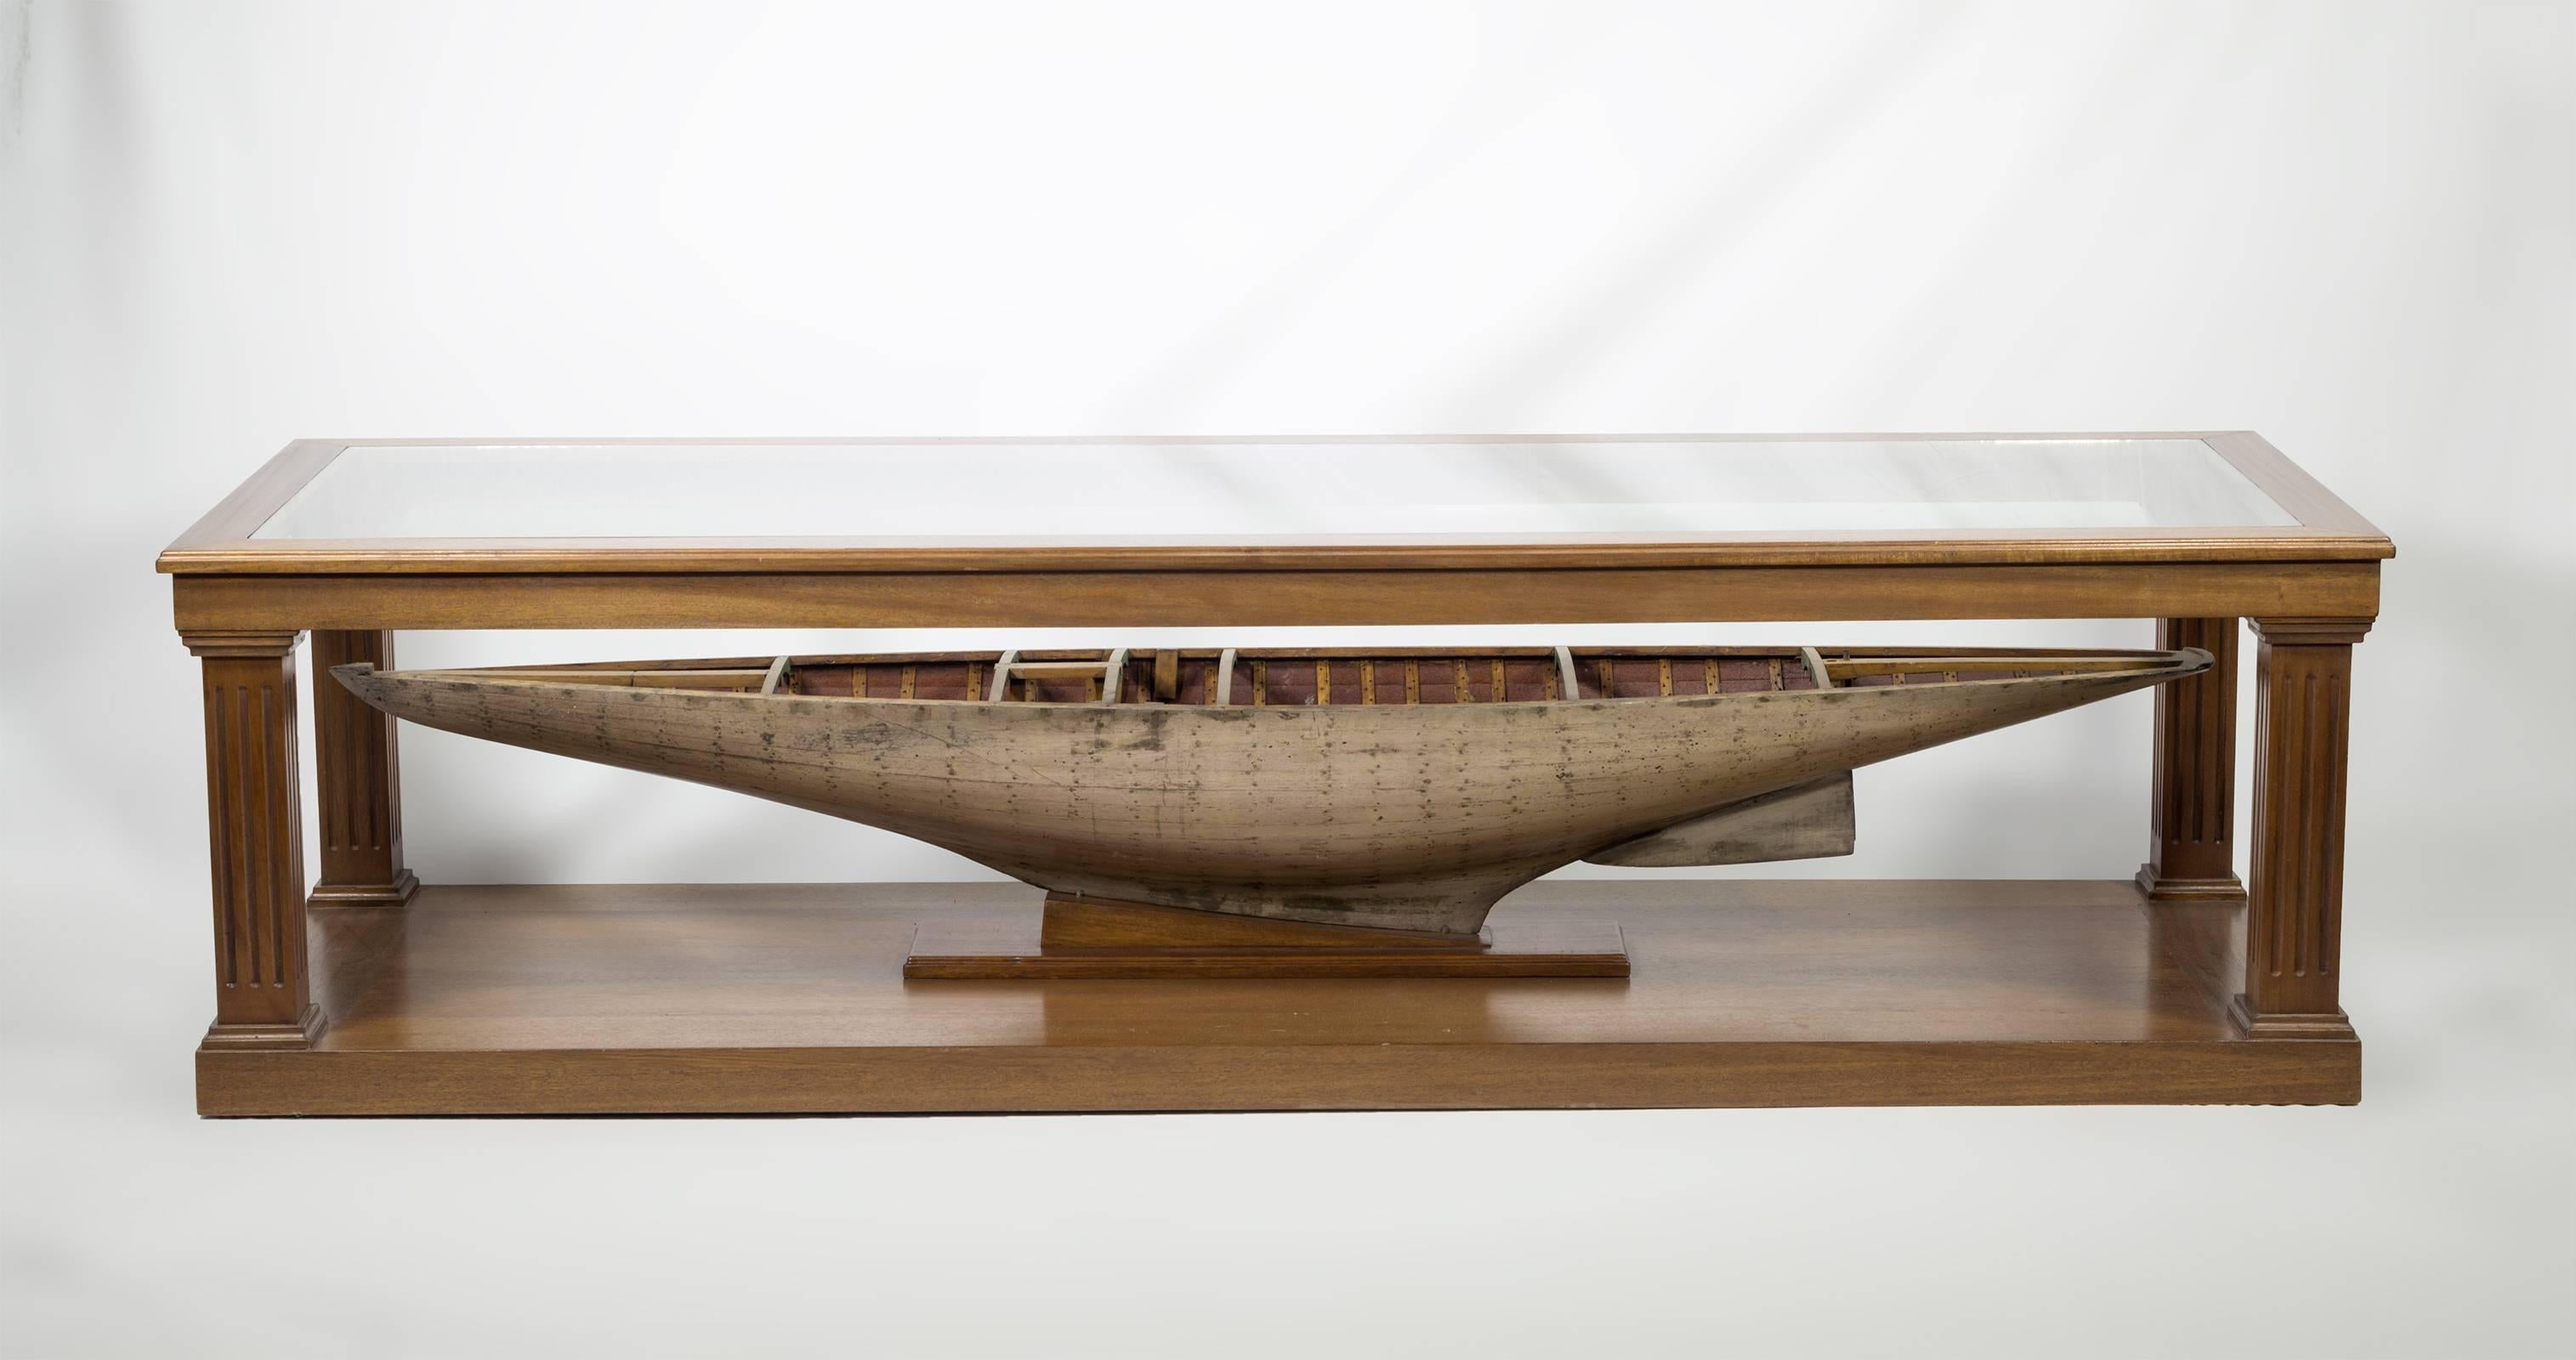 The coffee table has a recessed glass top and is bench made out of mahogany with fluted columns. The antique English pond yacht model is affixed to the bottom and bears its original white painted hull.
 